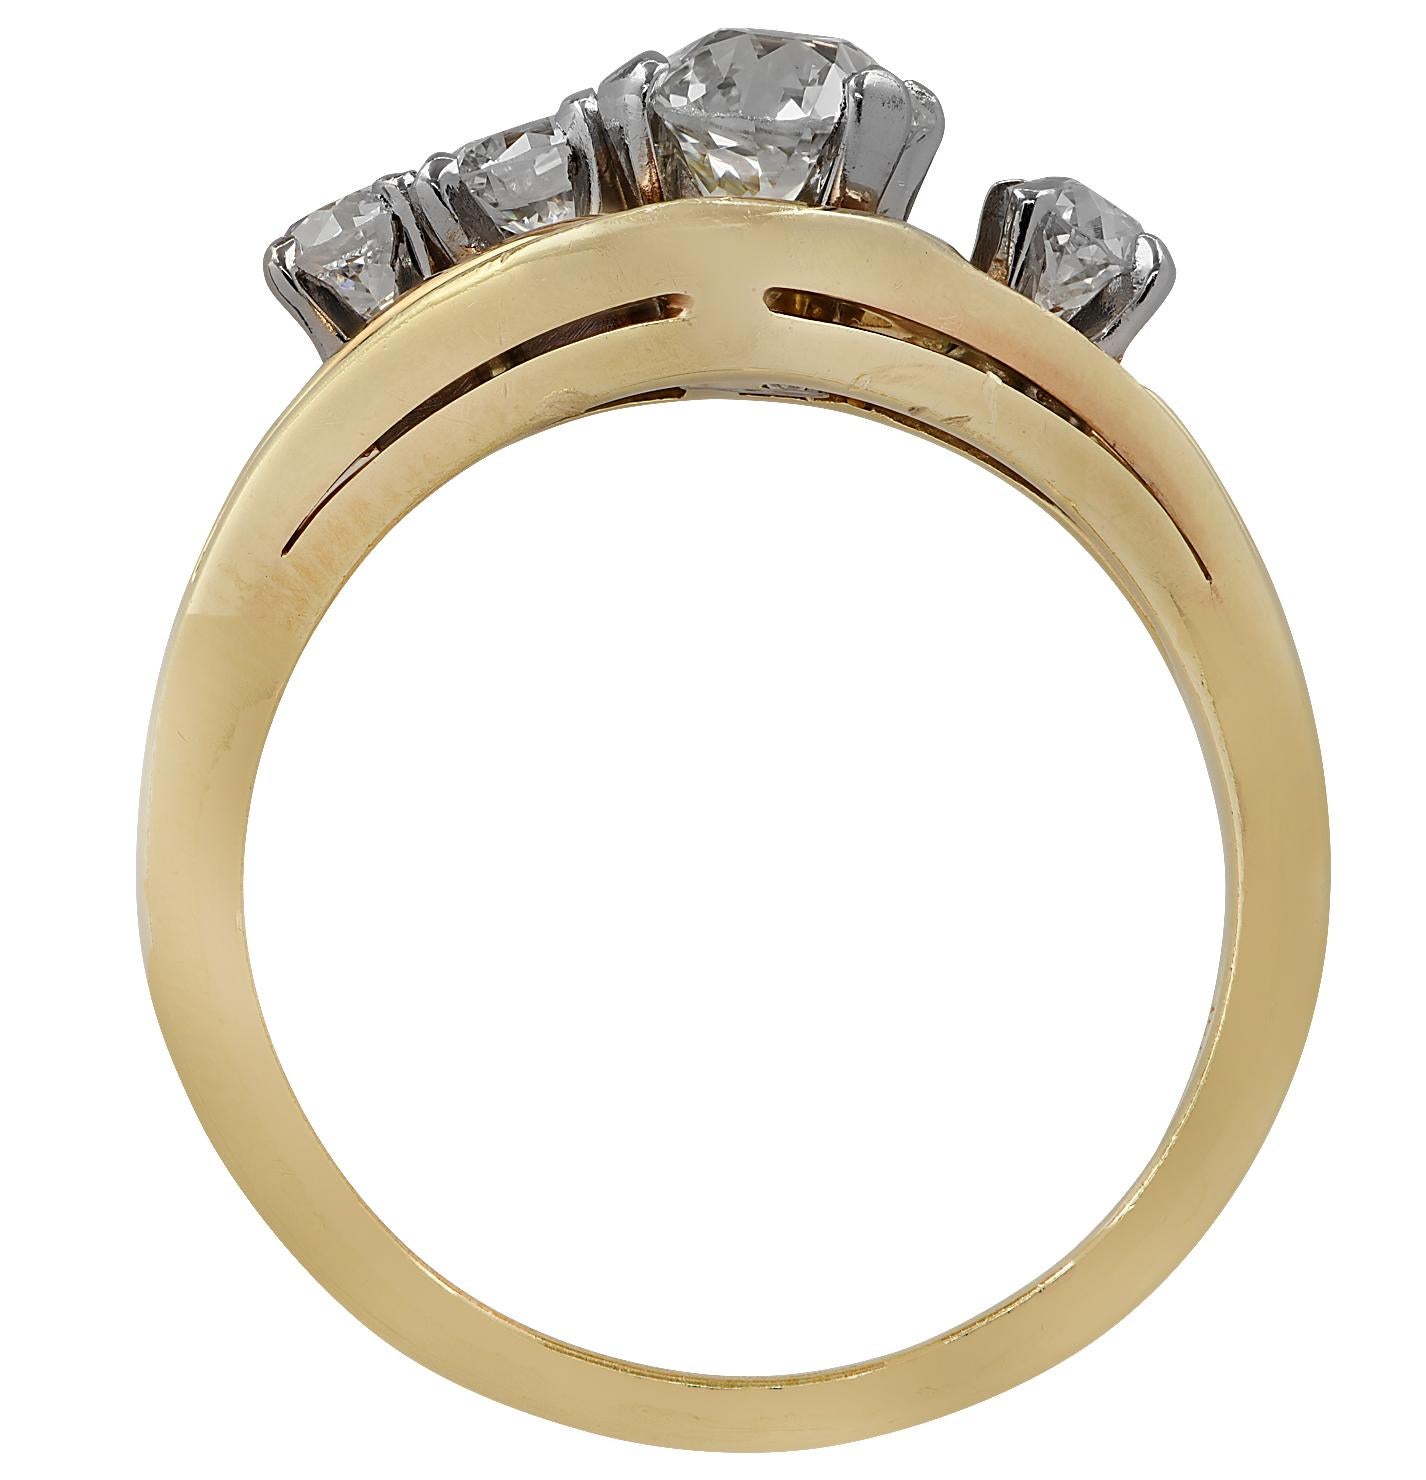 Enchanting ring crafted in 18 karat yellow gold showcasing a Miner Cut Diamond, 2 Old European Cut diamonds and a round brilliant cut diamond weighing approximately 1 carat total, G-I color, VS-SI clarity. This delightful ring measures 8.5 mm at its